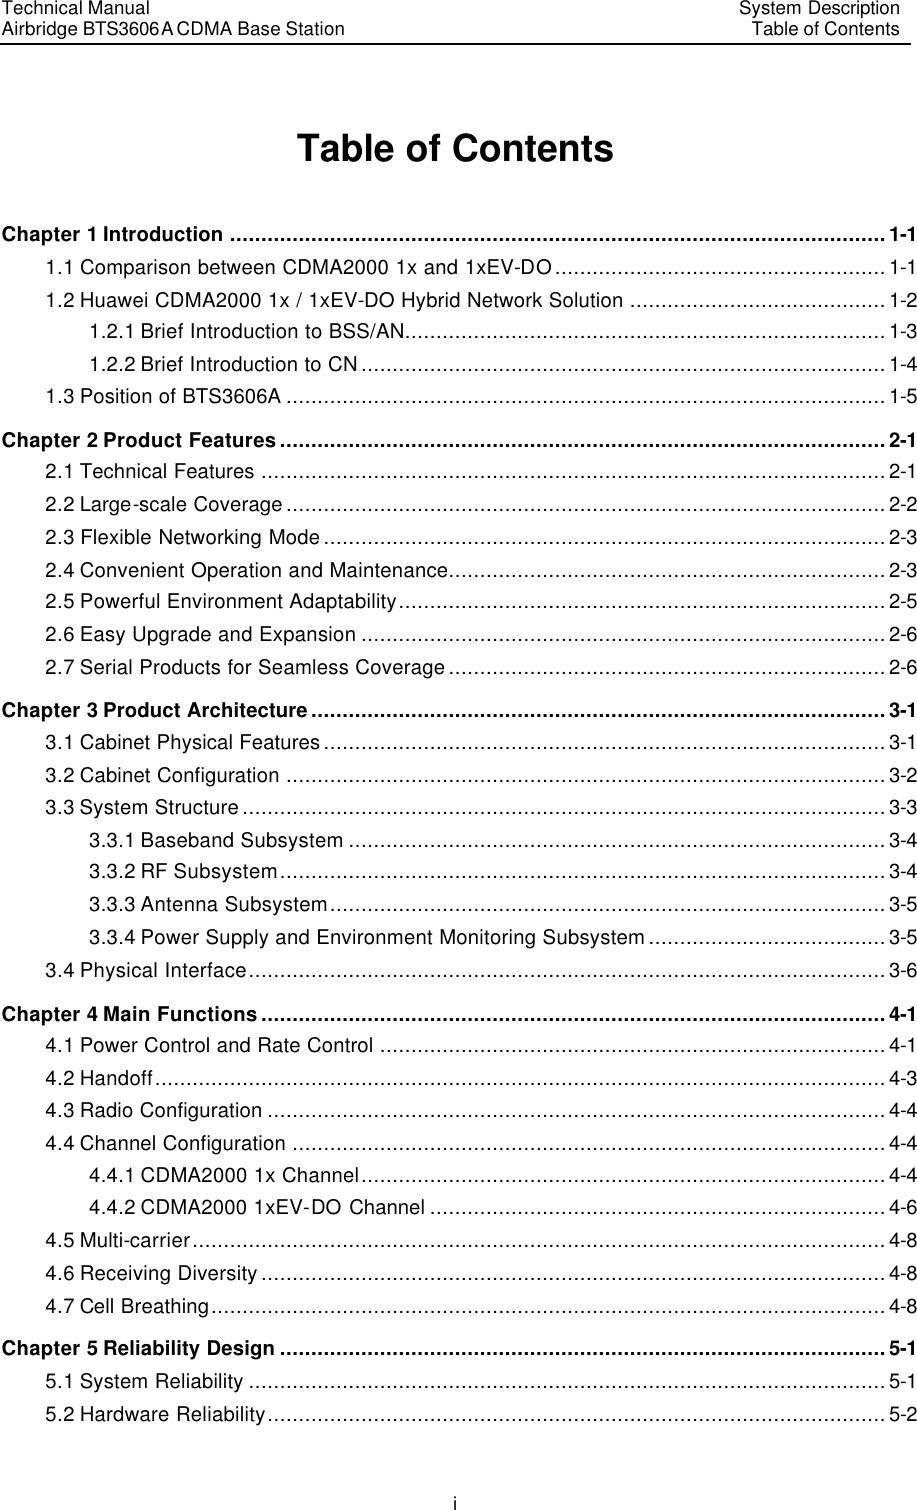 Technical Manual Airbridge BTS3606A CDMA Base Station System Description Table of Contents  i Table of Contents Chapter 1 Introduction .........................................................................................................1-1 1.1 Comparison between CDMA2000 1x and 1xEV-DO.....................................................1-1 1.2 Huawei CDMA2000 1x / 1xEV-DO Hybrid Network Solution .........................................1-2 1.2.1 Brief Introduction to BSS/AN.............................................................................1-3 1.2.2 Brief Introduction to CN....................................................................................1-4 1.3 Position of BTS3606A ................................................................................................1-5 Chapter 2 Product Features.................................................................................................2-1 2.1 Technical Features ....................................................................................................2-1 2.2 Large-scale Coverage................................................................................................2-2 2.3 Flexible Networking Mode..........................................................................................2-3 2.4 Convenient Operation and Maintenance......................................................................2-3 2.5 Powerful Environment Adaptability..............................................................................2-5 2.6 Easy Upgrade and Expansion ....................................................................................2-6 2.7 Serial Products for Seamless Coverage......................................................................2-6 Chapter 3 Product Architecture............................................................................................3-1 3.1 Cabinet Physical Features..........................................................................................3-1 3.2 Cabinet Configuration ................................................................................................3-2 3.3 System Structure.......................................................................................................3-3 3.3.1 Baseband Subsystem ......................................................................................3-4 3.3.2 RF Subsystem.................................................................................................3-4 3.3.3 Antenna Subsystem.........................................................................................3-5 3.3.4 Power Supply and Environment Monitoring Subsystem......................................3-5 3.4 Physical Interface......................................................................................................3-6 Chapter 4 Main Functions....................................................................................................4-1 4.1 Power Control and Rate Control .................................................................................4-1 4.2 Handoff.....................................................................................................................4-3 4.3 Radio Configuration ...................................................................................................4-4 4.4 Channel Configuration ...............................................................................................4-4 4.4.1 CDMA2000 1x Channel....................................................................................4-4 4.4.2 CDMA2000 1xEV-DO Channel .........................................................................4-6 4.5 Multi-carrier...............................................................................................................4-8 4.6 Receiving Diversity....................................................................................................4-8 4.7 Cell Breathing............................................................................................................4-8 Chapter 5 Reliability Design .................................................................................................5-1 5.1 System Reliability ......................................................................................................5-1 5.2 Hardware Reliability...................................................................................................5-2 